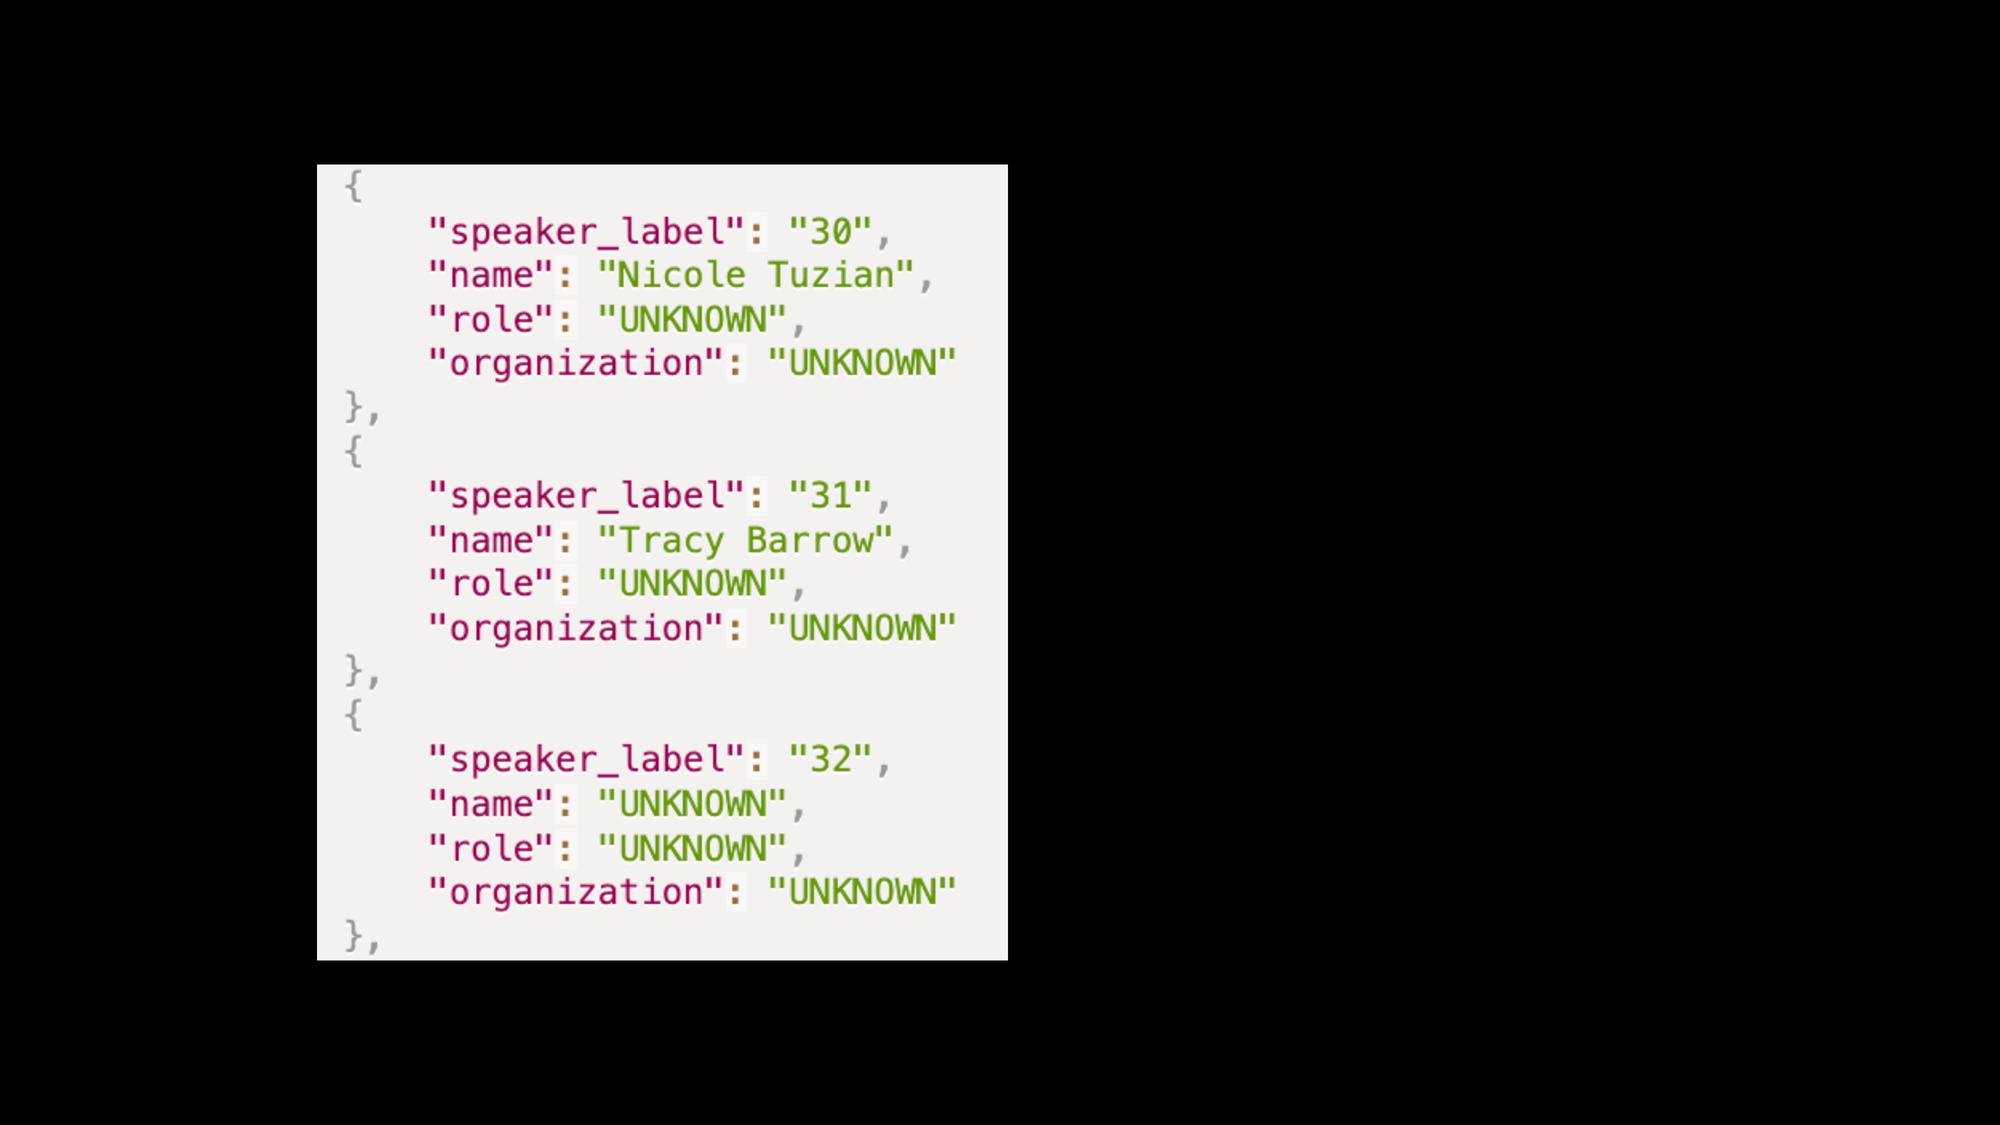 A JSON list of three identified speakers with fields speaker_label, name, role, and organization.